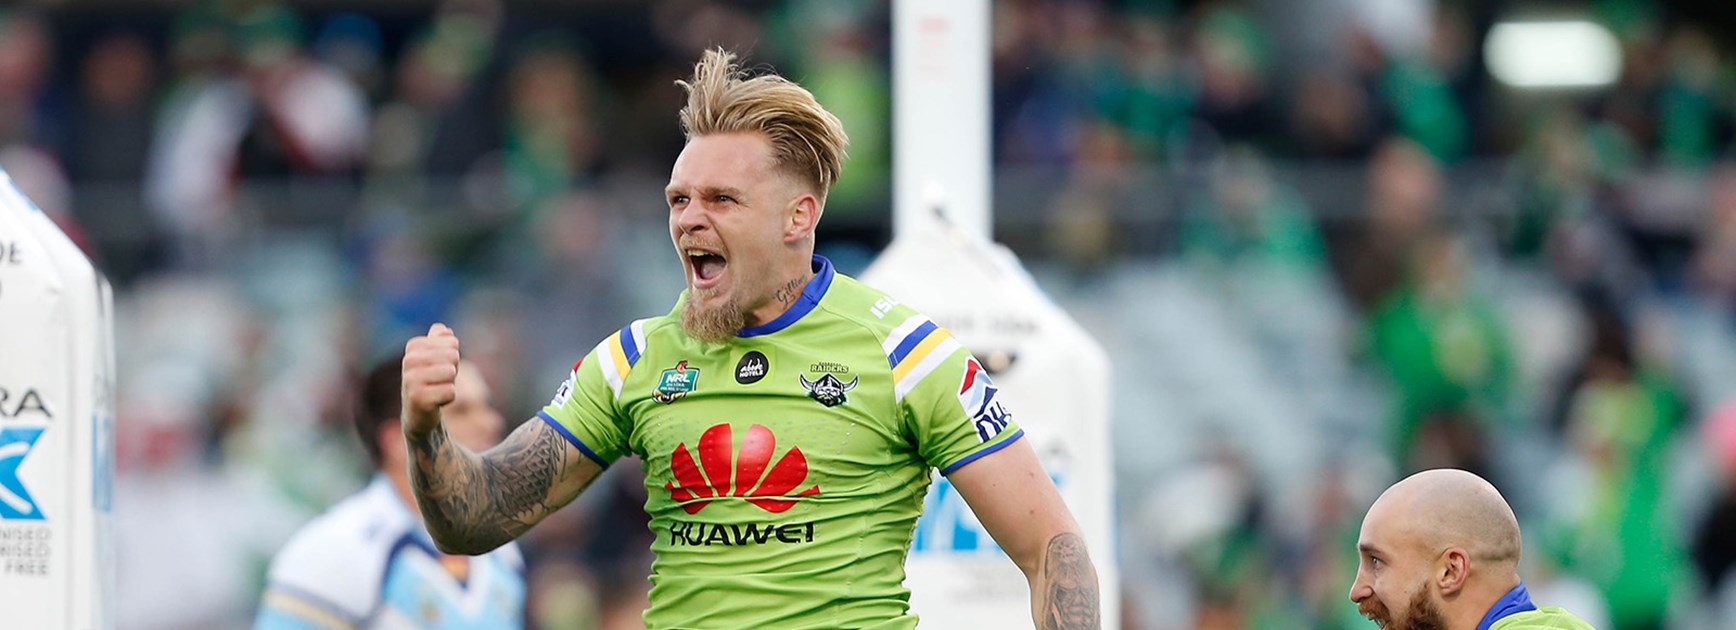 Canberra five-eighth Blake Austin was in fine form against the Titans, scoring two tries in Round 9 at GIO Stadium.